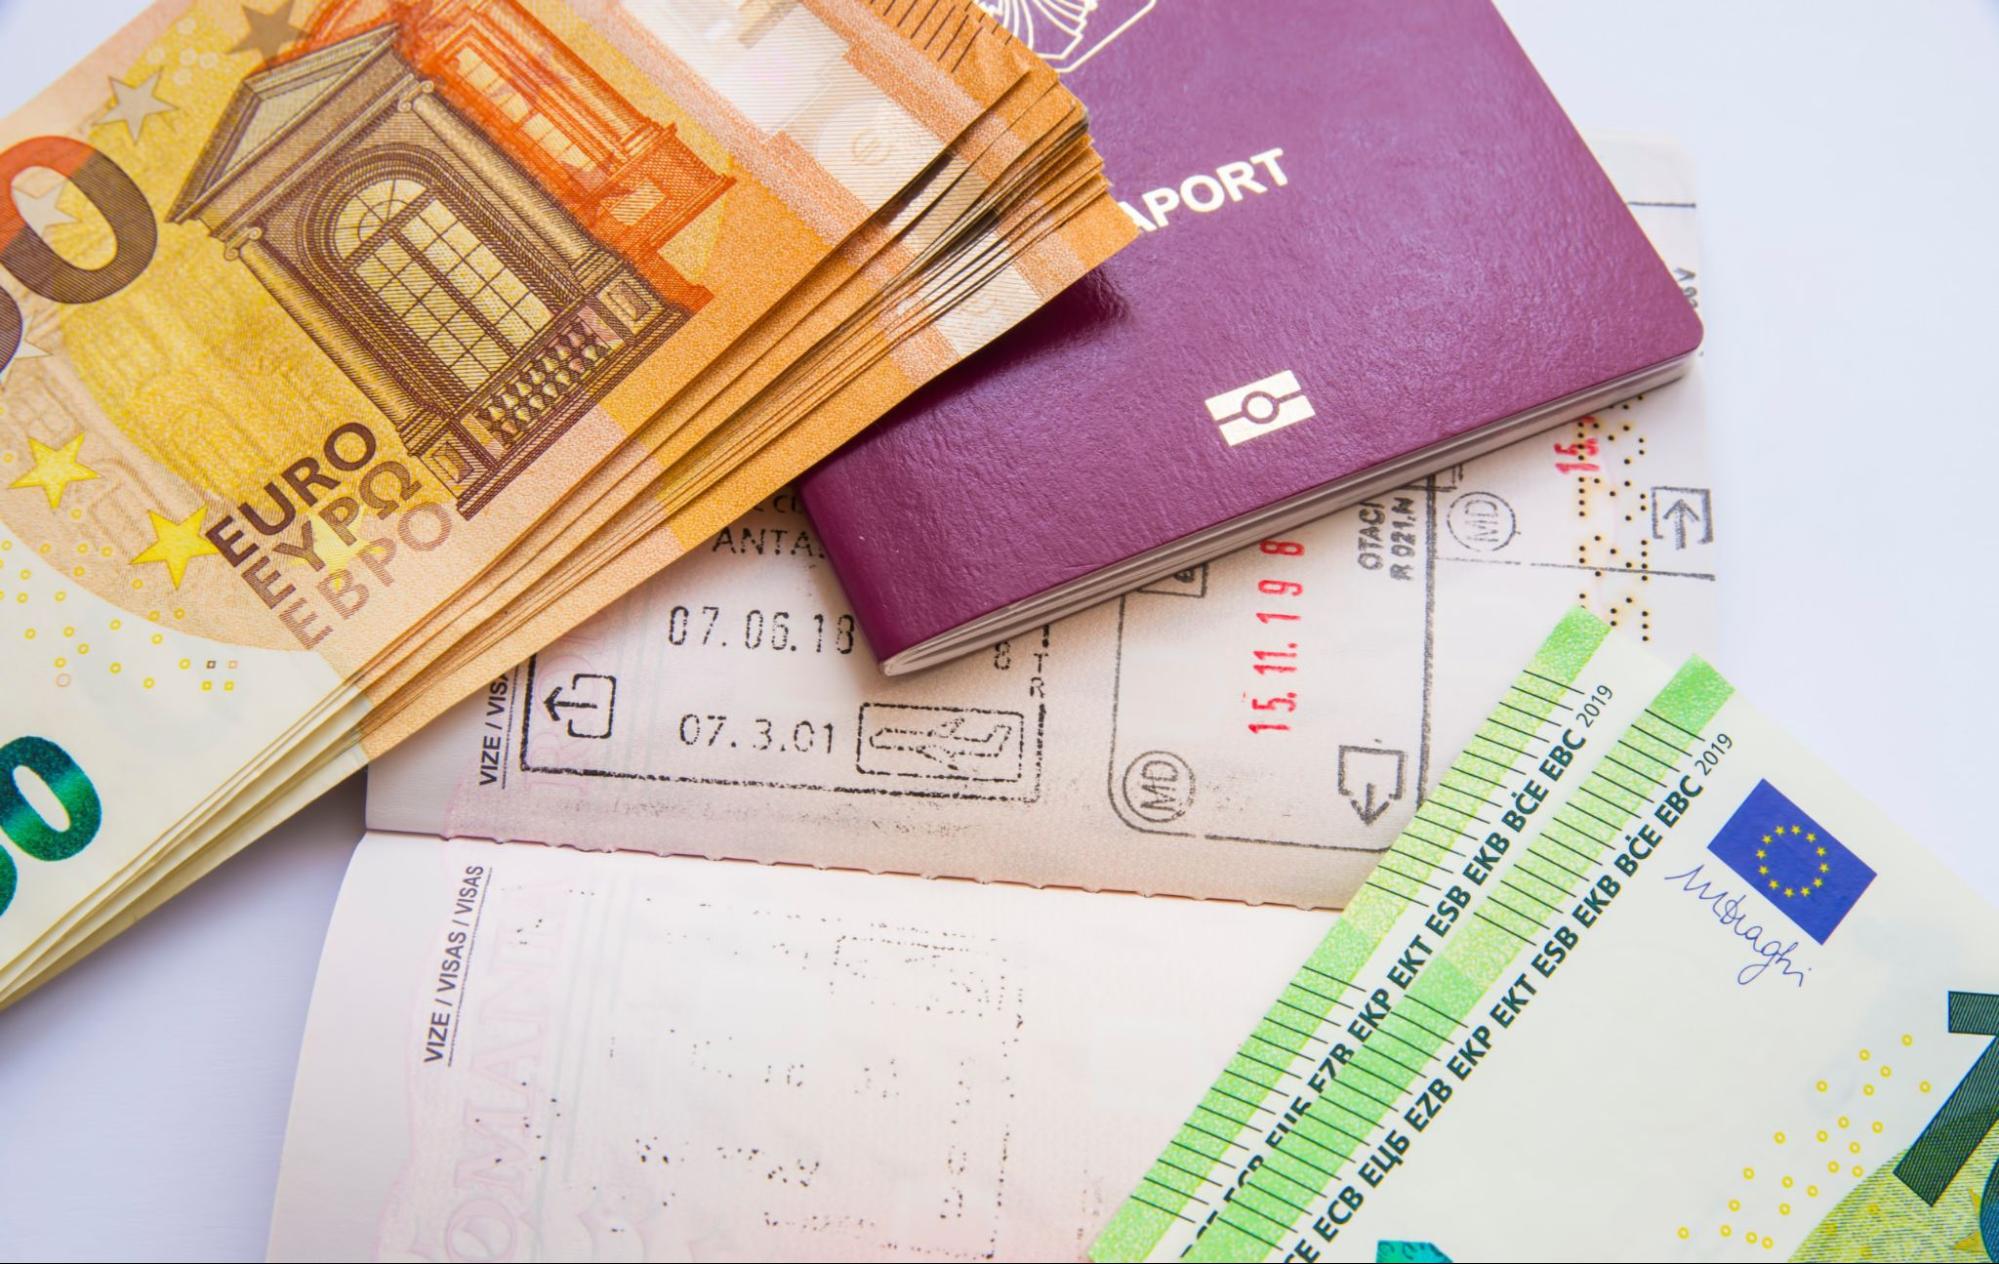 Close image of euro currency and passport visa stamps